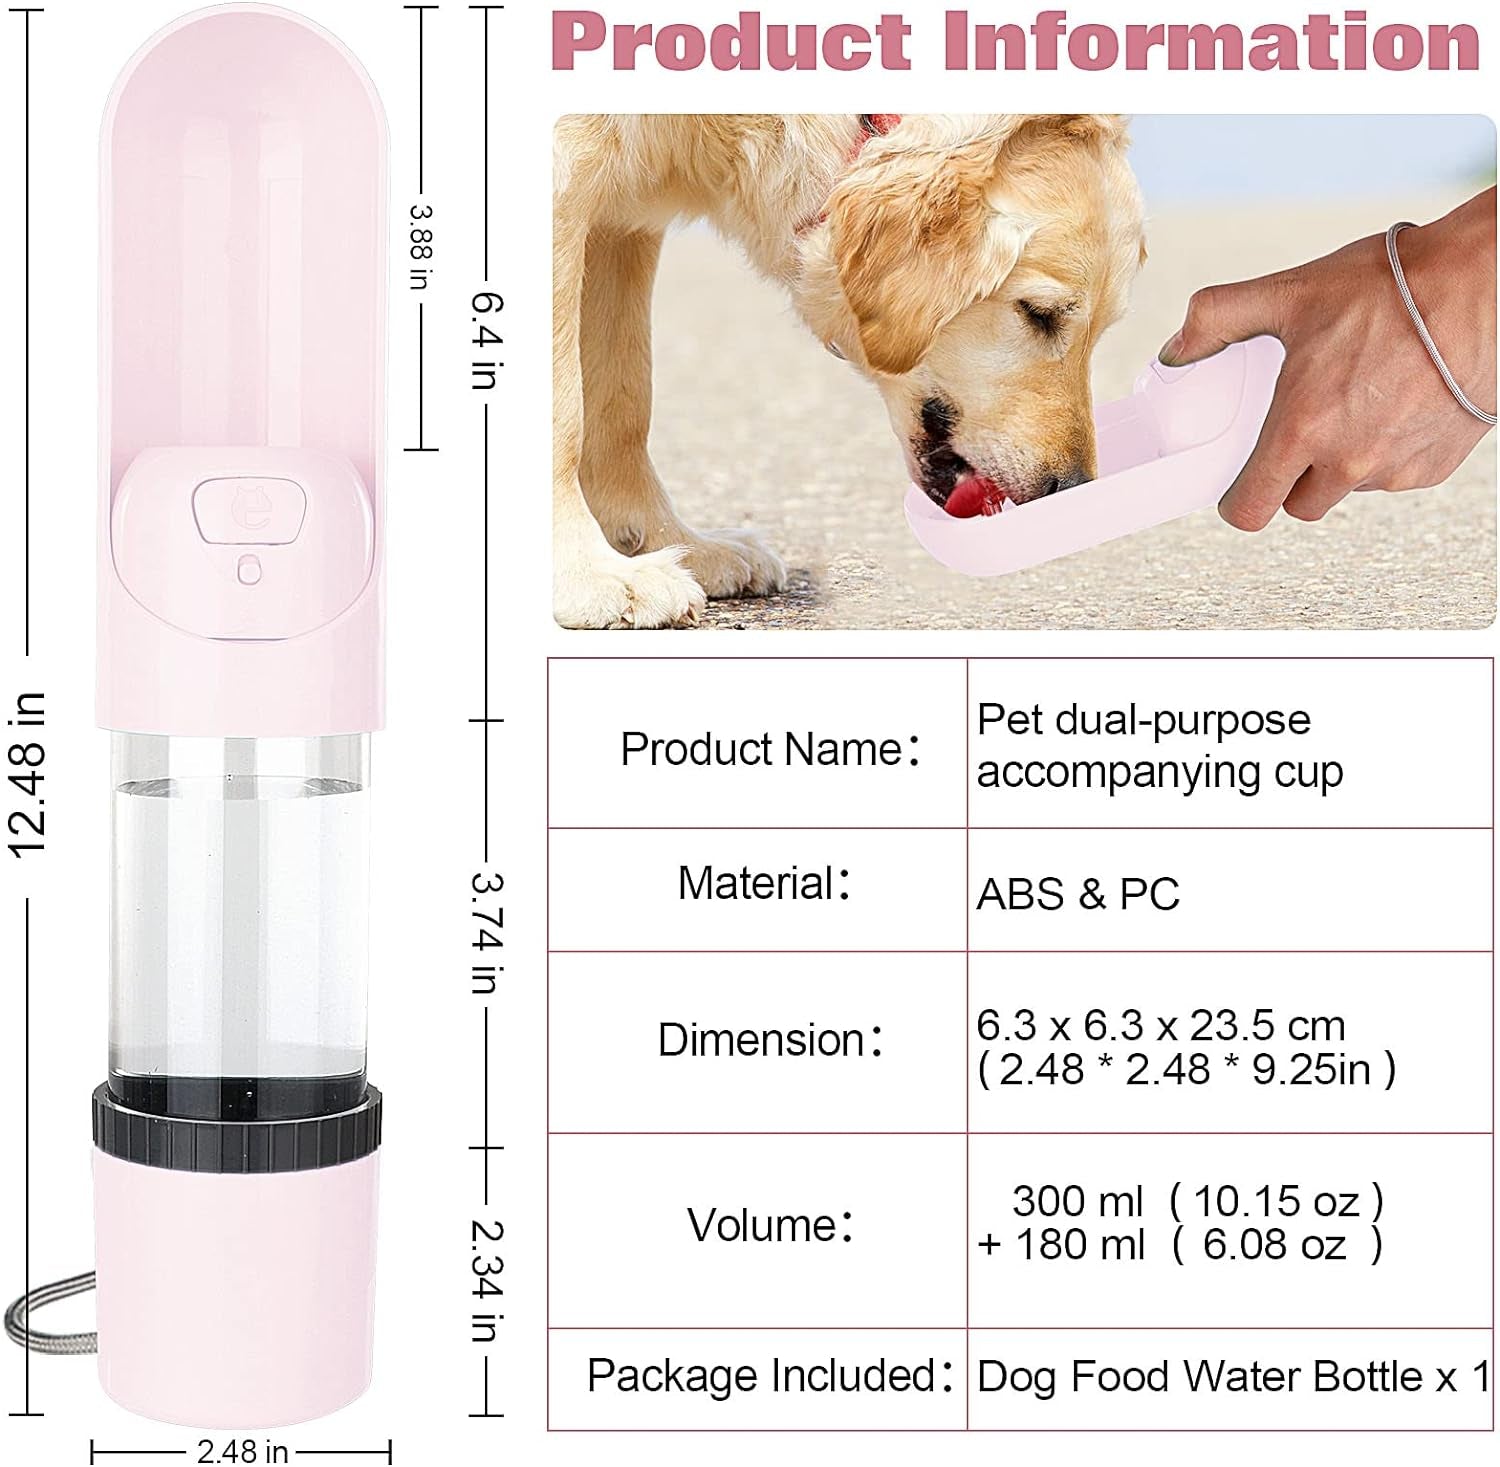 Dog Cat Travel Water Bottle: Portable Leak-Proof Dog Water Dispenser, Suitable for Kitty and Puppy Outdoor Walking, Hiking and Traveling (2 in 1 Pink)